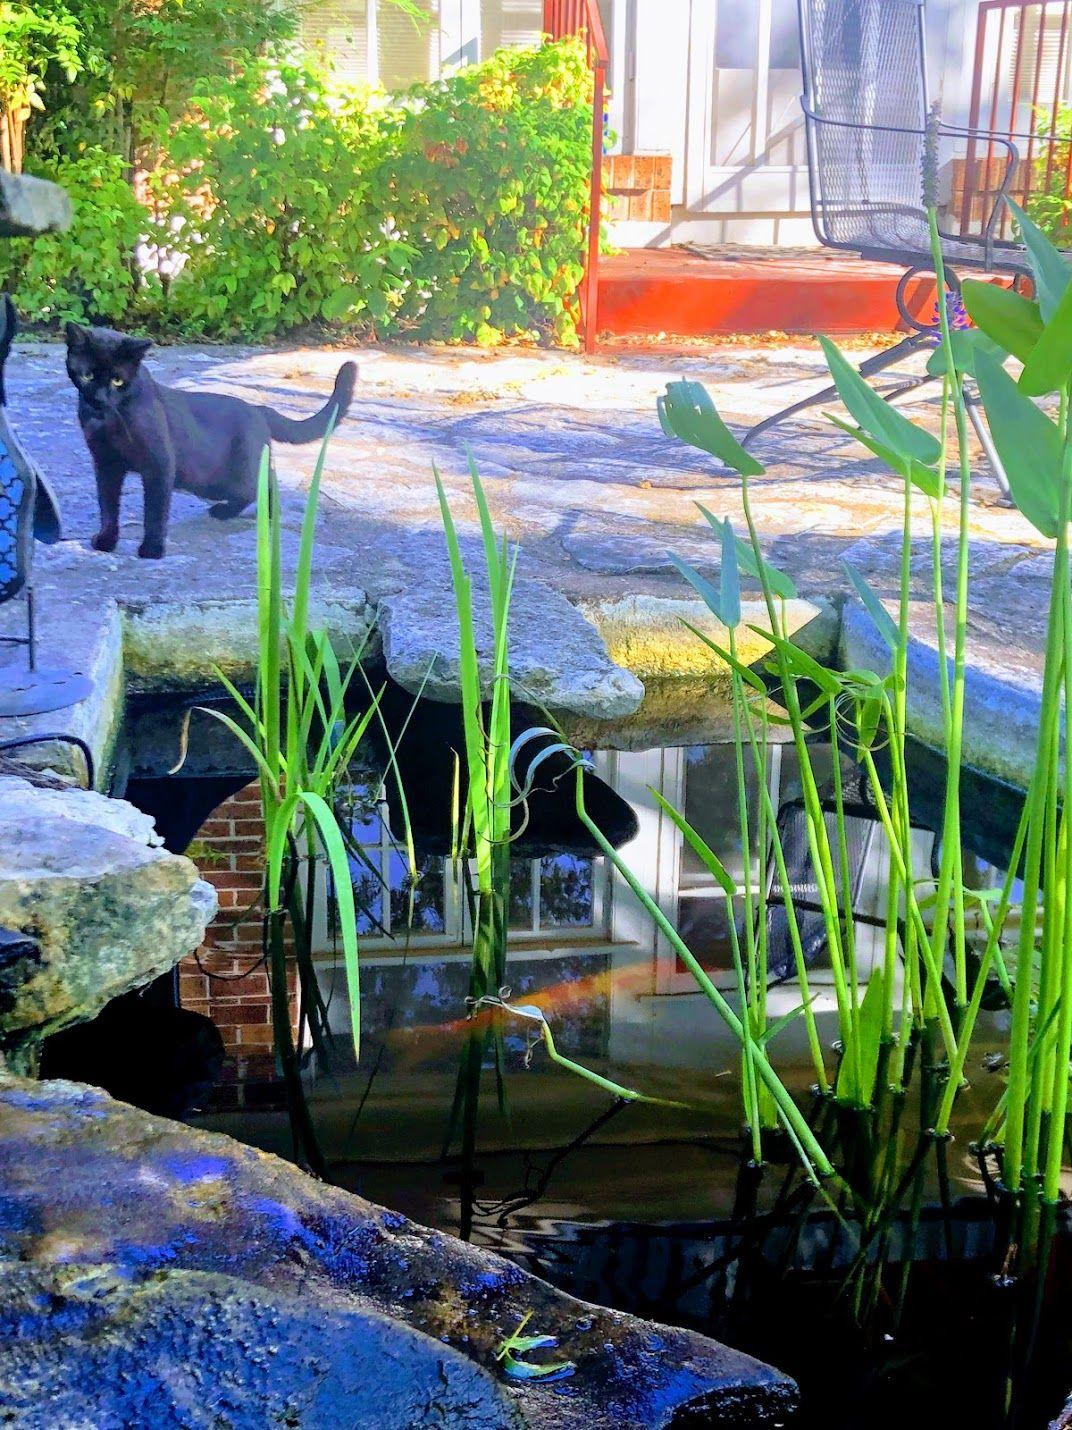 A pond with a black cat sitting on the rocks behind it in the backyard of Magnolia House.